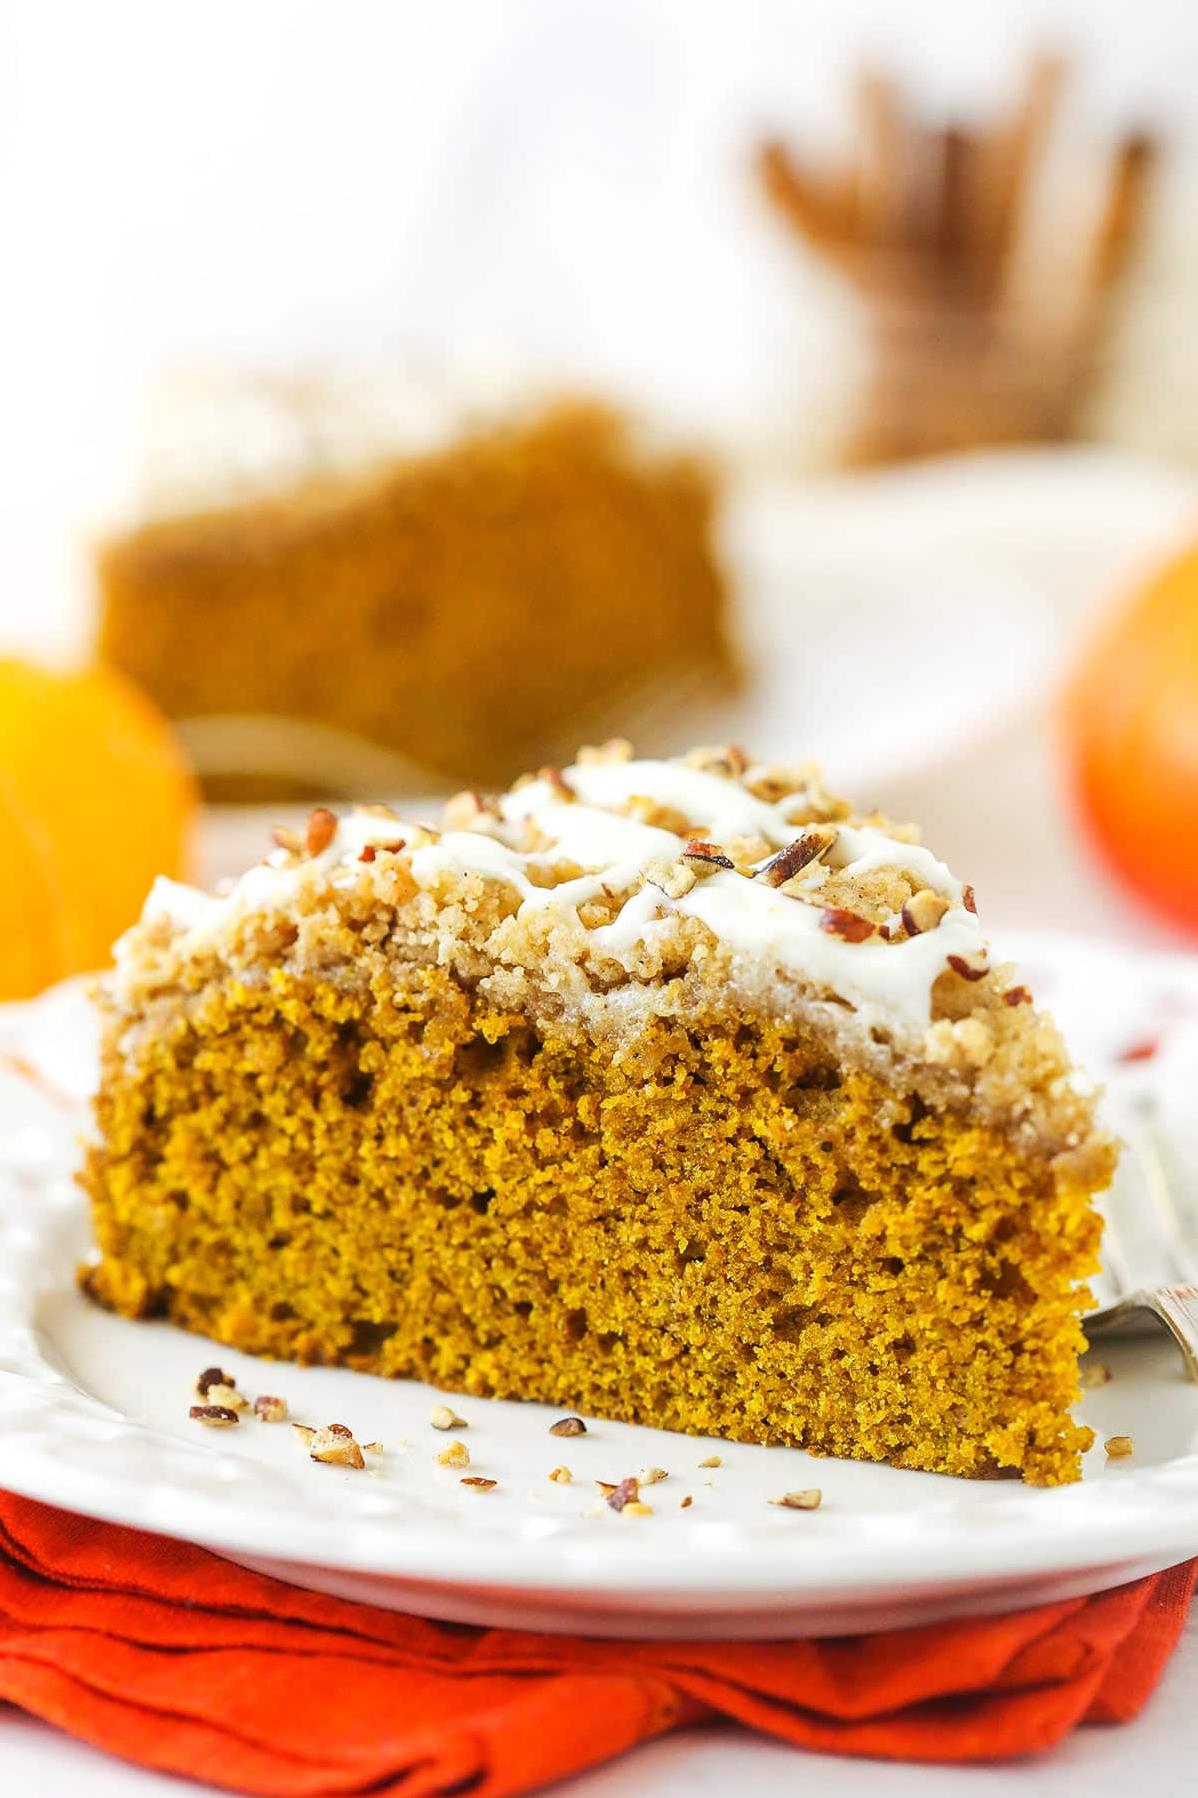  Dive into fall with a slice of this Pumpkin Cinnamon Streusel Coffee Cake